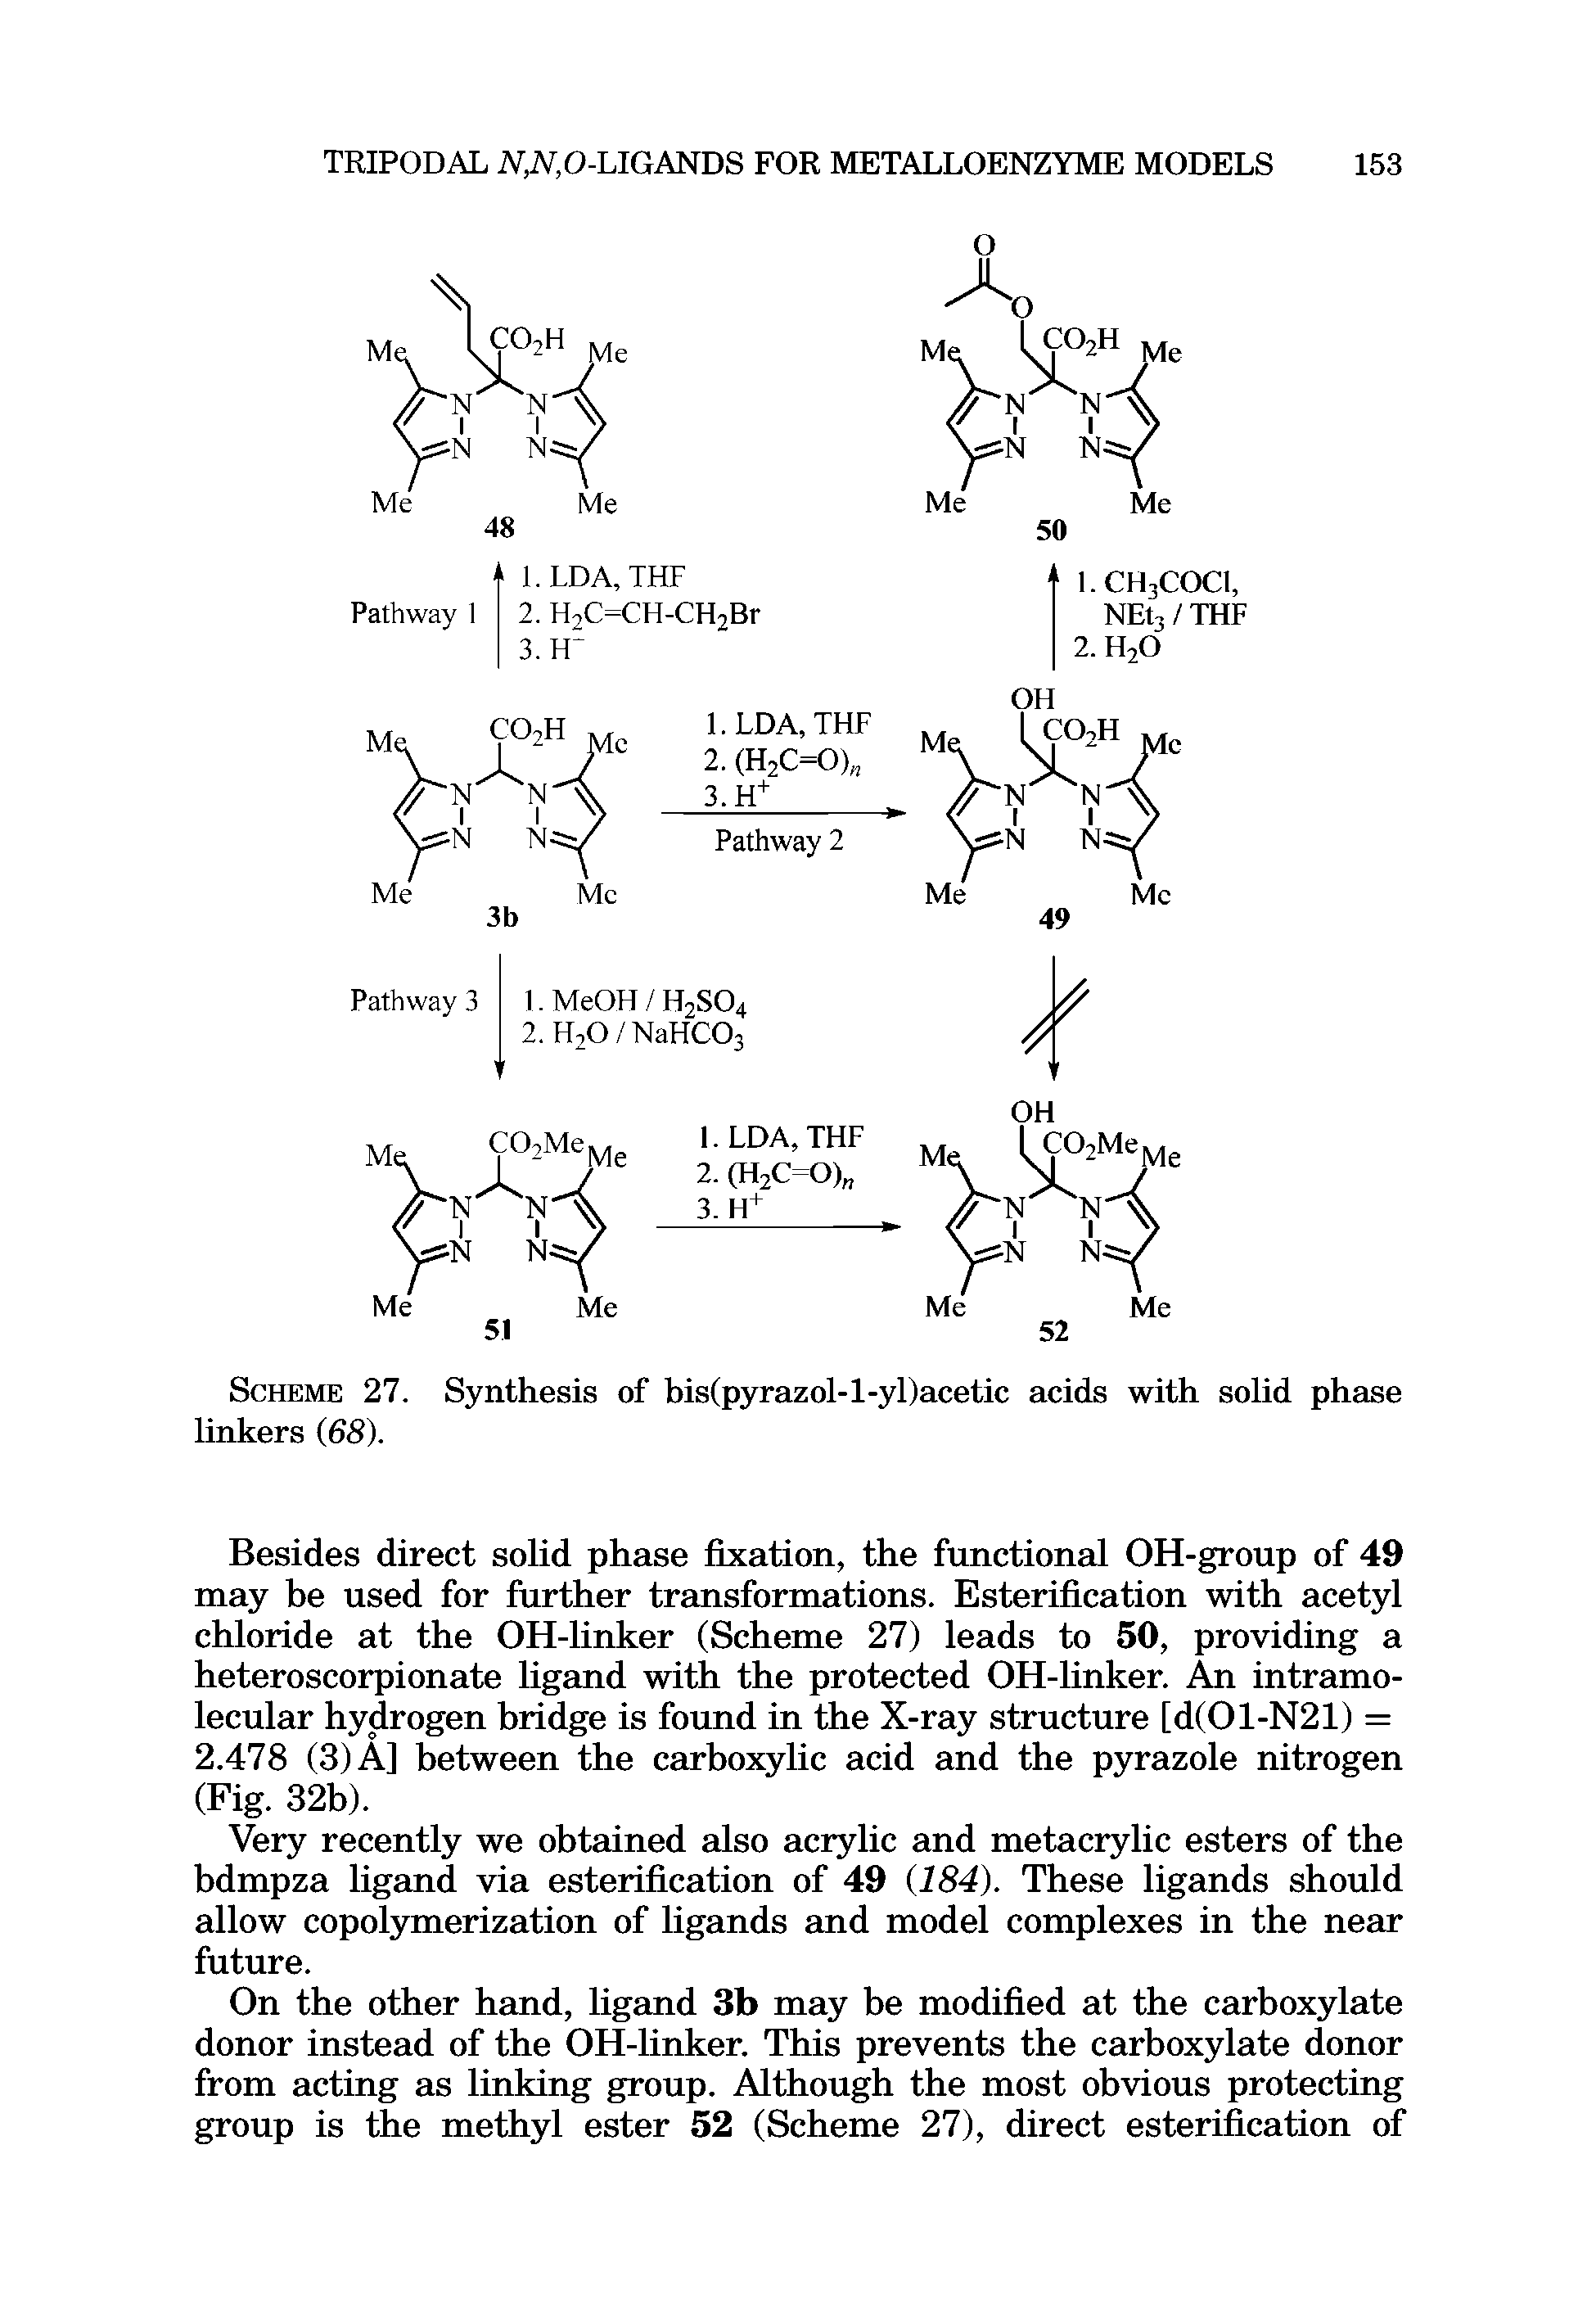 Scheme 27. Synthesis of bis(pyrazol-l-yl)acetic acids with solid phase linkers (68).